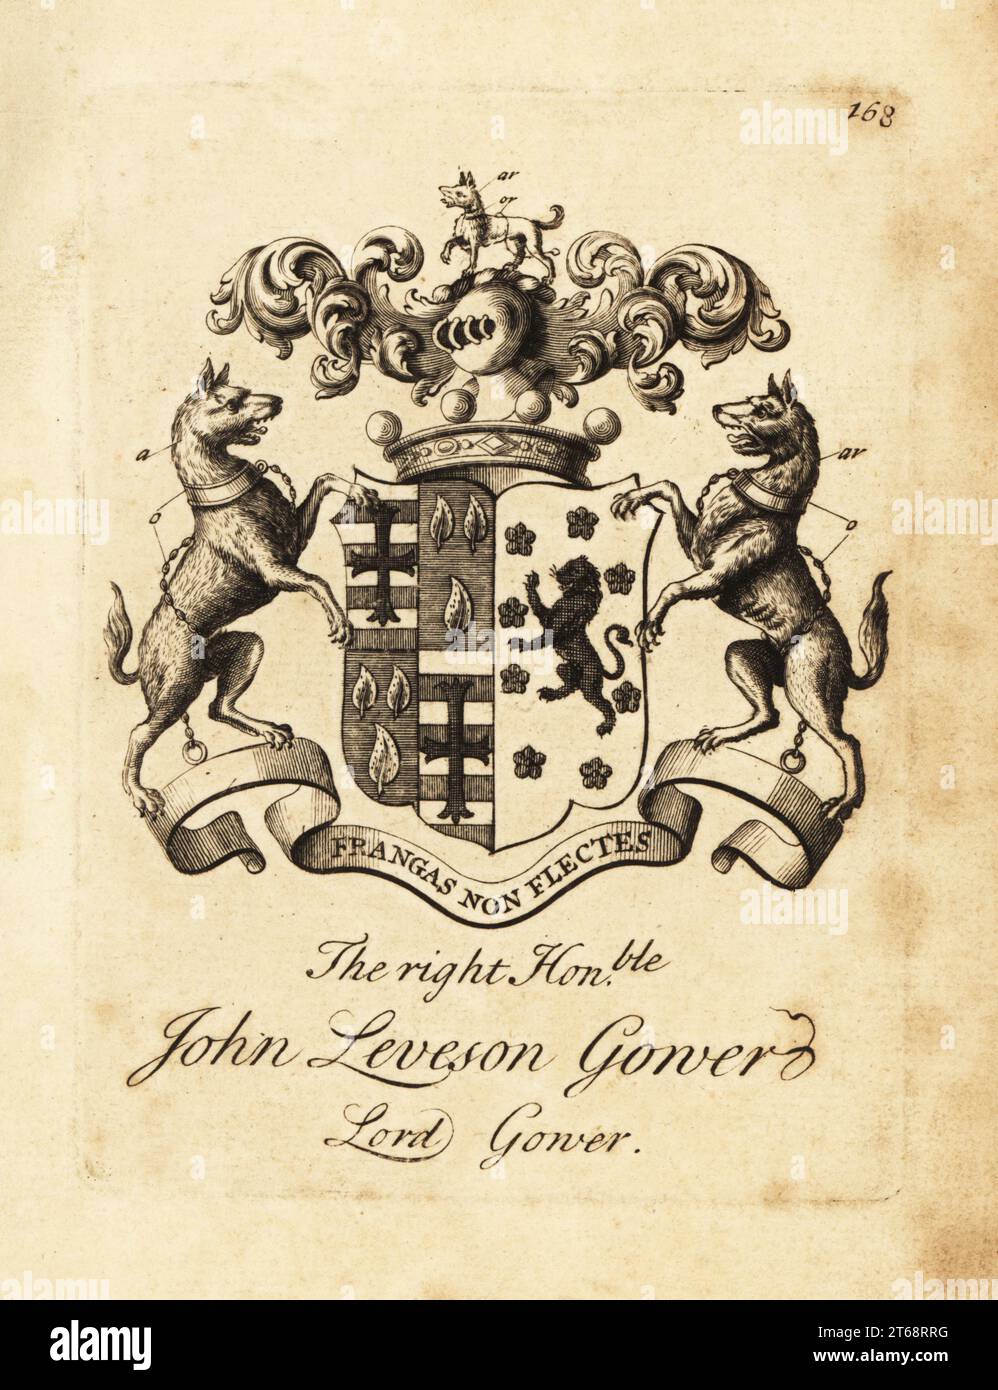 Coat of arms of the Right Honourable John Leveson Gower, Lord Gower., 1st Earl Gower, 1694-1754. Copperplate engraving by Andrew Johnston after C. Gardiner from Notitia Anglicana, Shewing the Achievements of all the English Nobility, Andrew Johnson, the Strand, London, 1724. Stock Photo